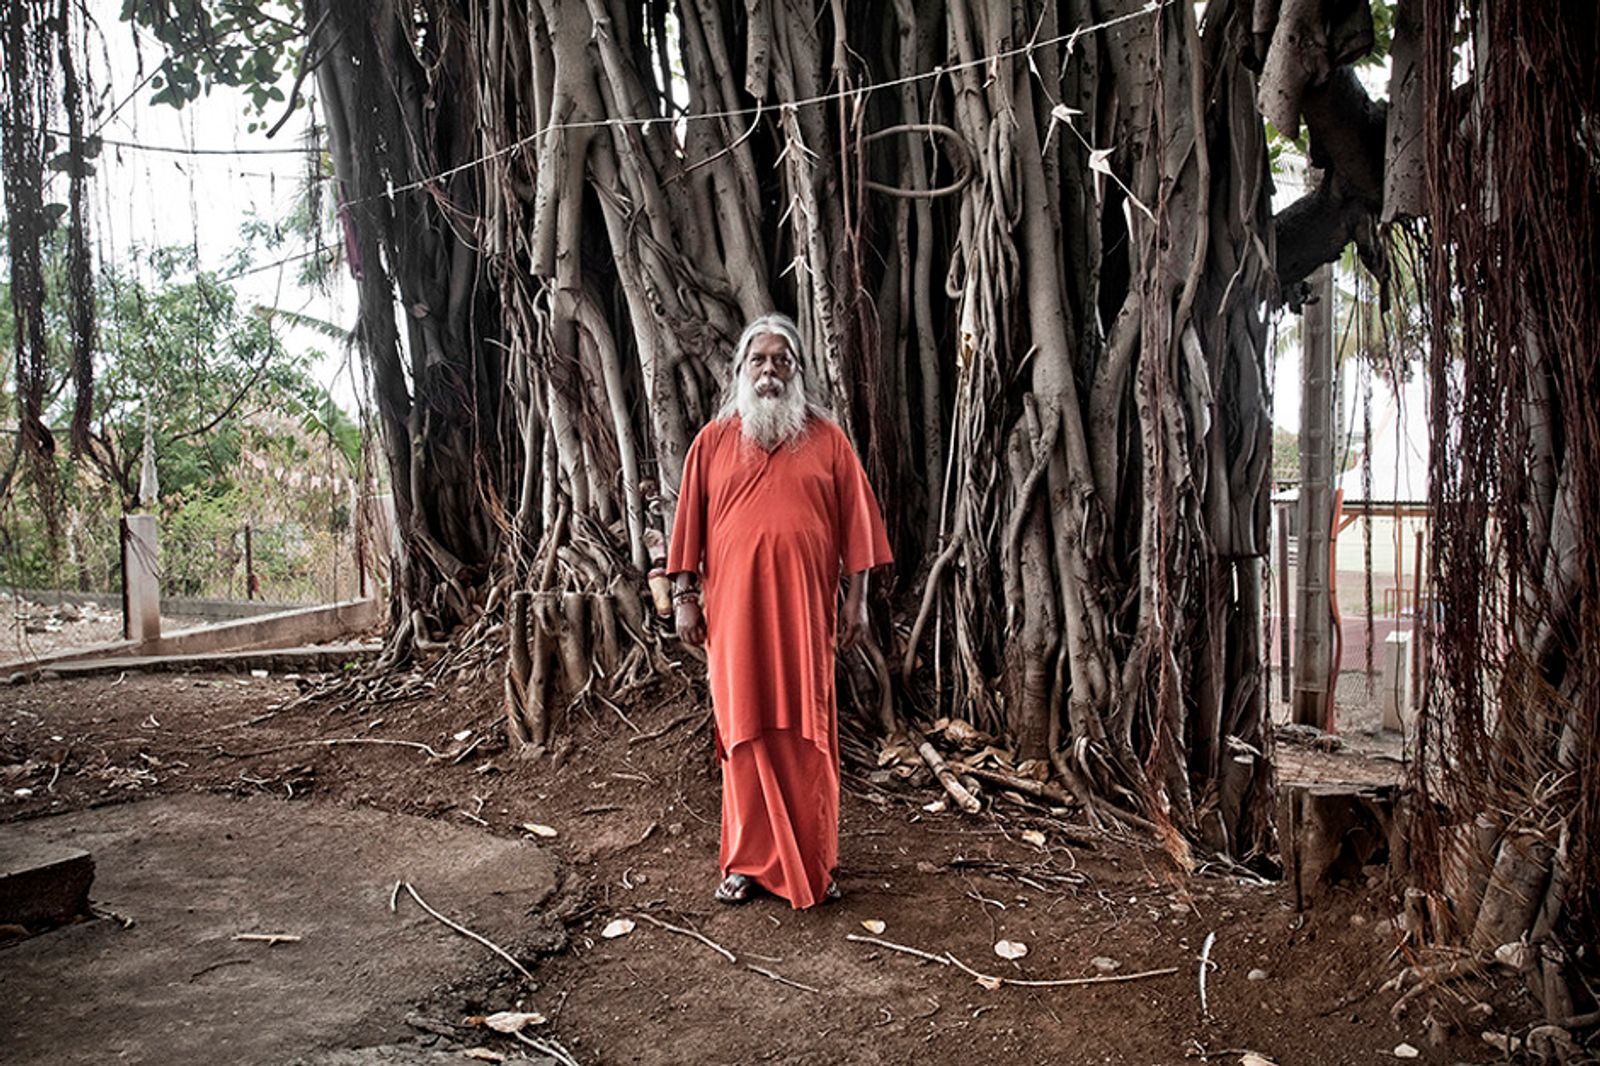 © Morgan Fache - Image from the From India to Reunion Island:From indenture to emancipation photography project